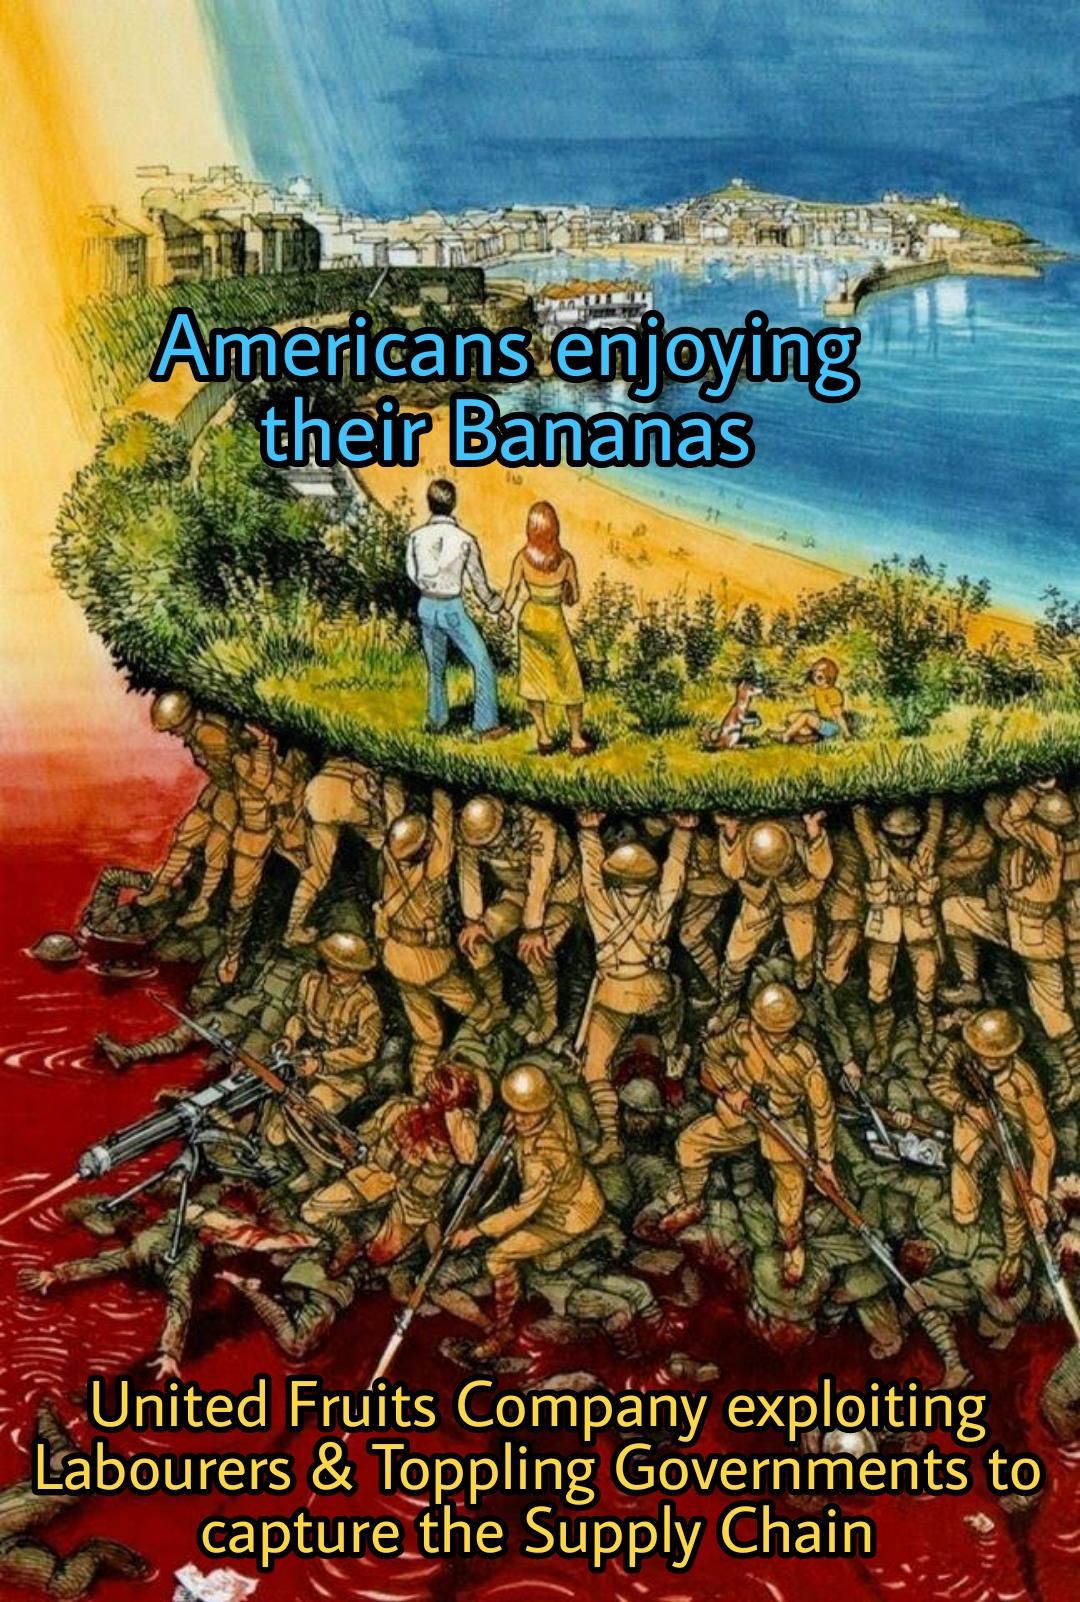 Your Banana has Blood on it lads